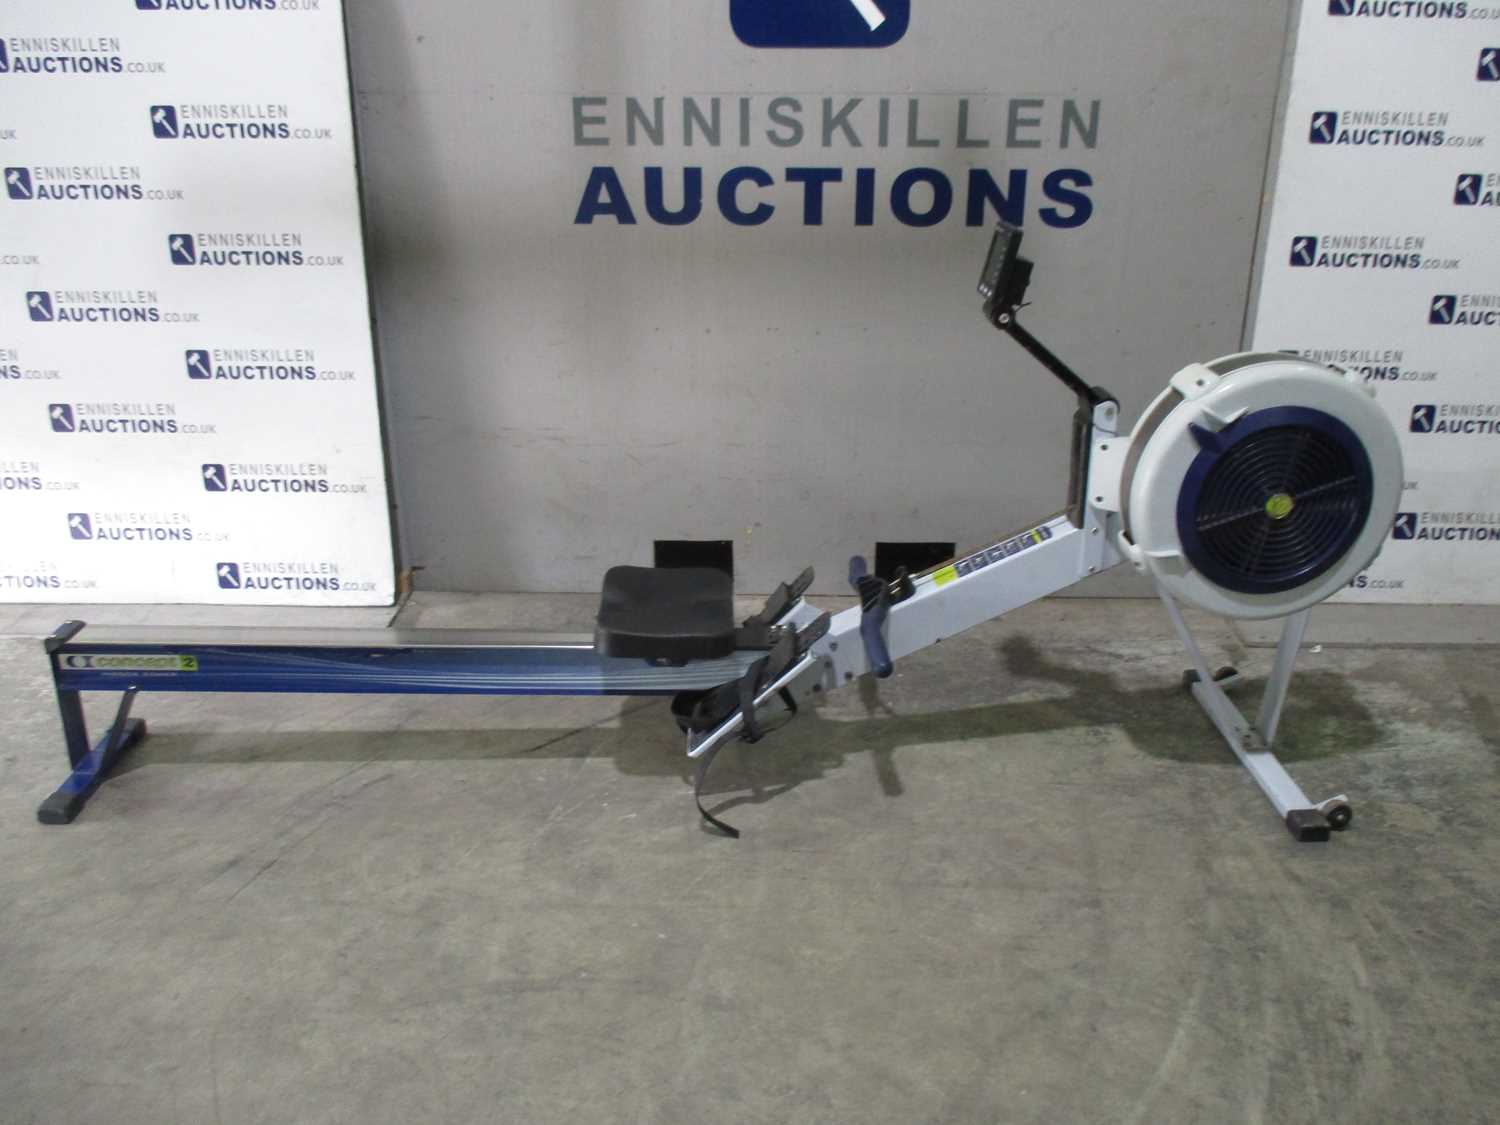 52 - CONCEPT 2 MODEL D ROWER WITH PM5 DISPLAY